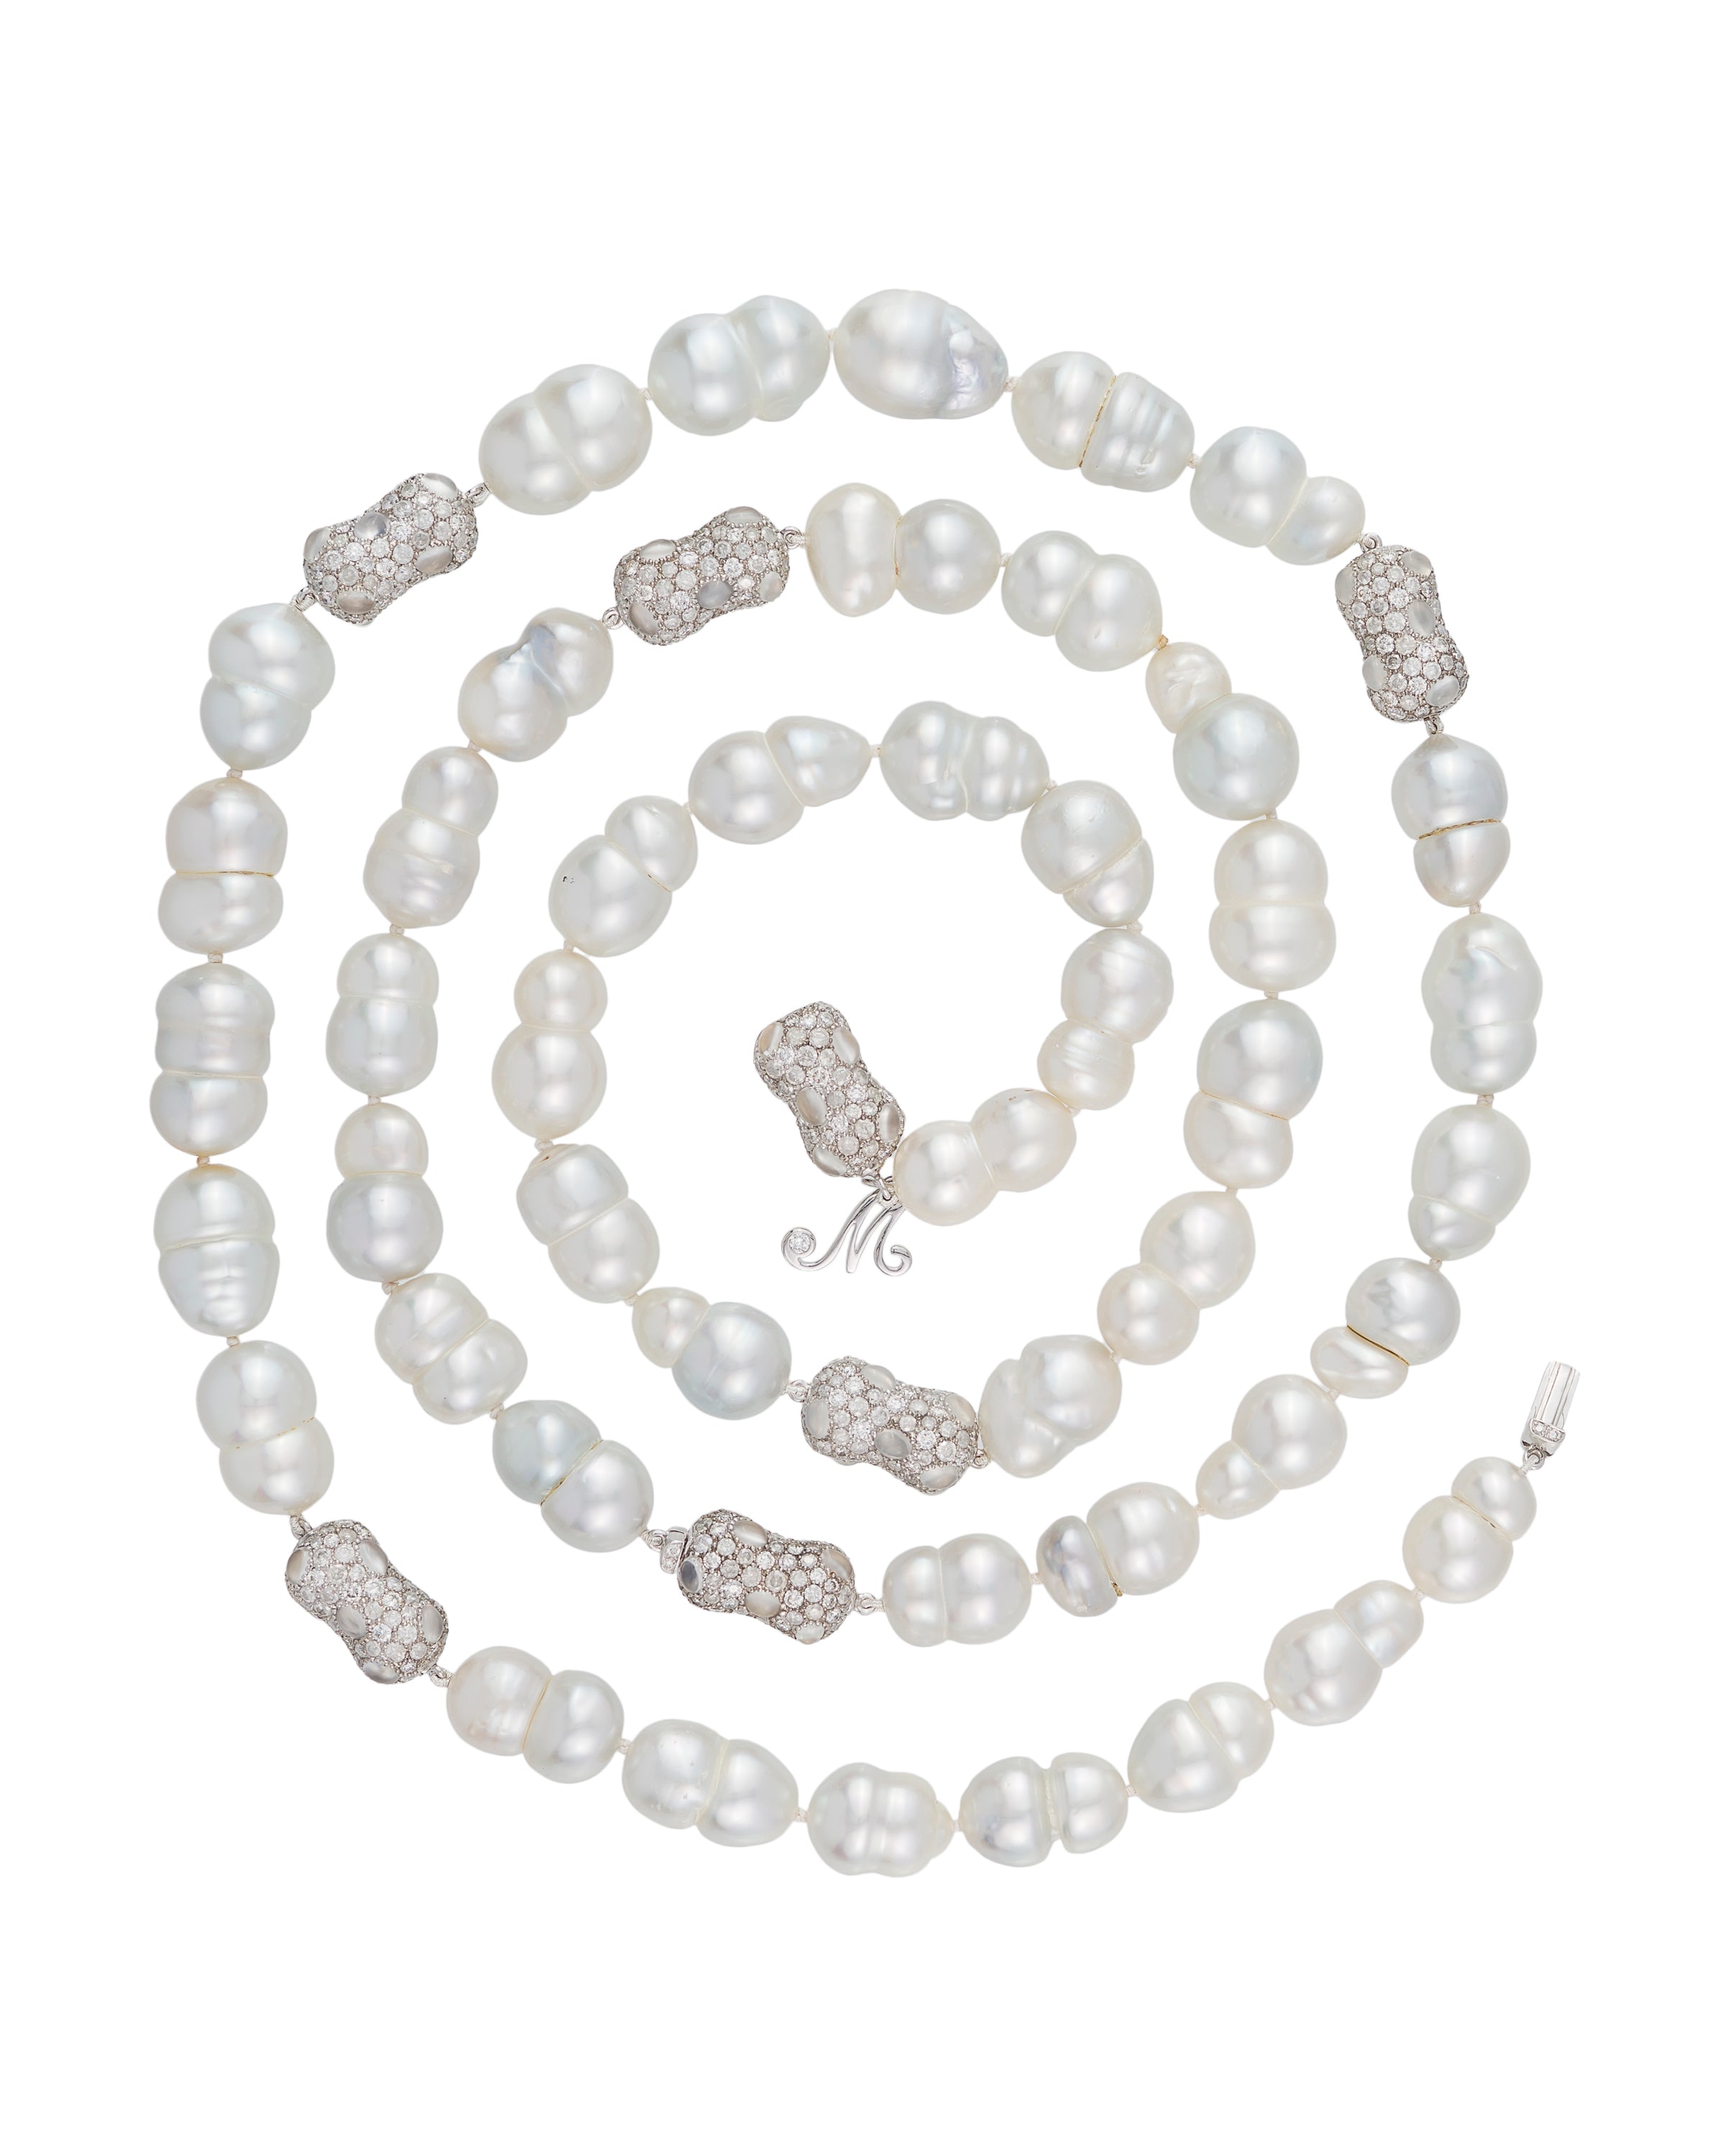 "Snowmen" South Sea pearl necklace with diamond and moonstone 'peanut' enhancers, crafted in 18 karat white gold.